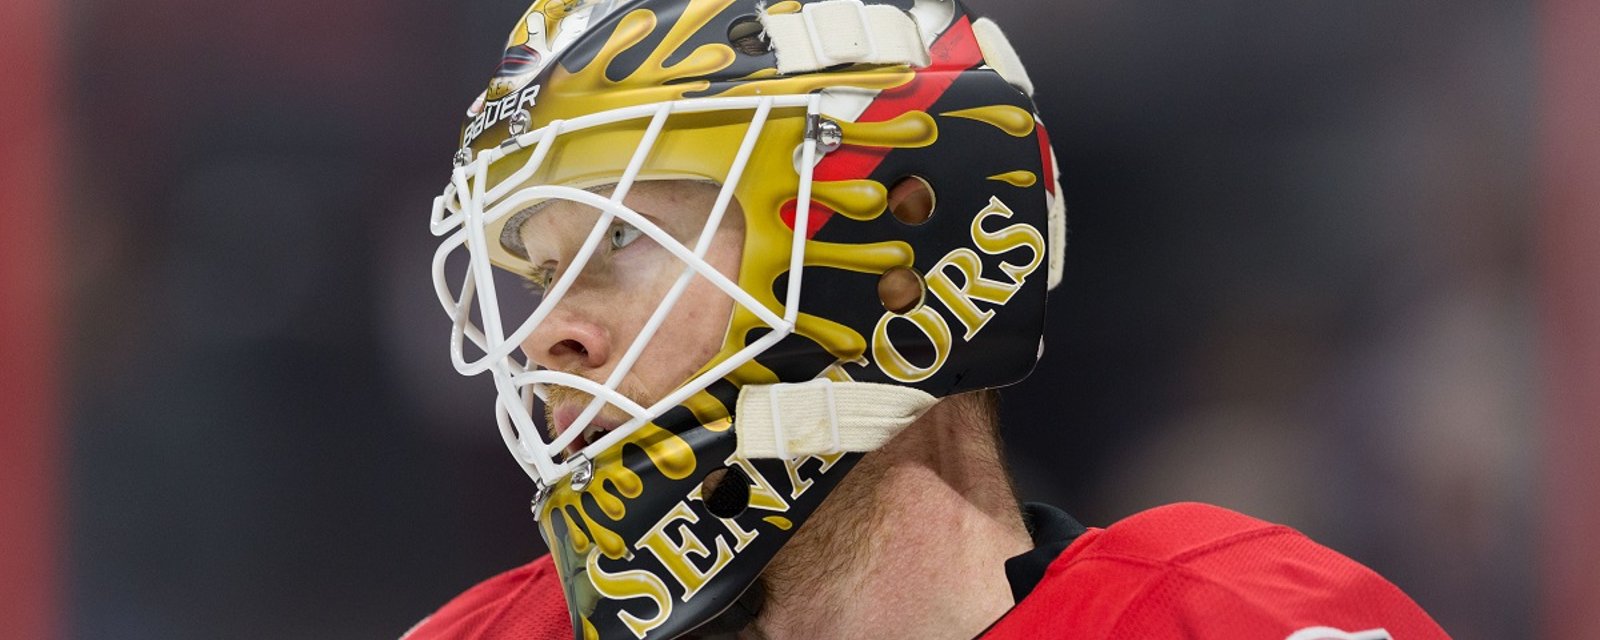 NHL goalie making his 8th straight start fter being waived by two teams this season.